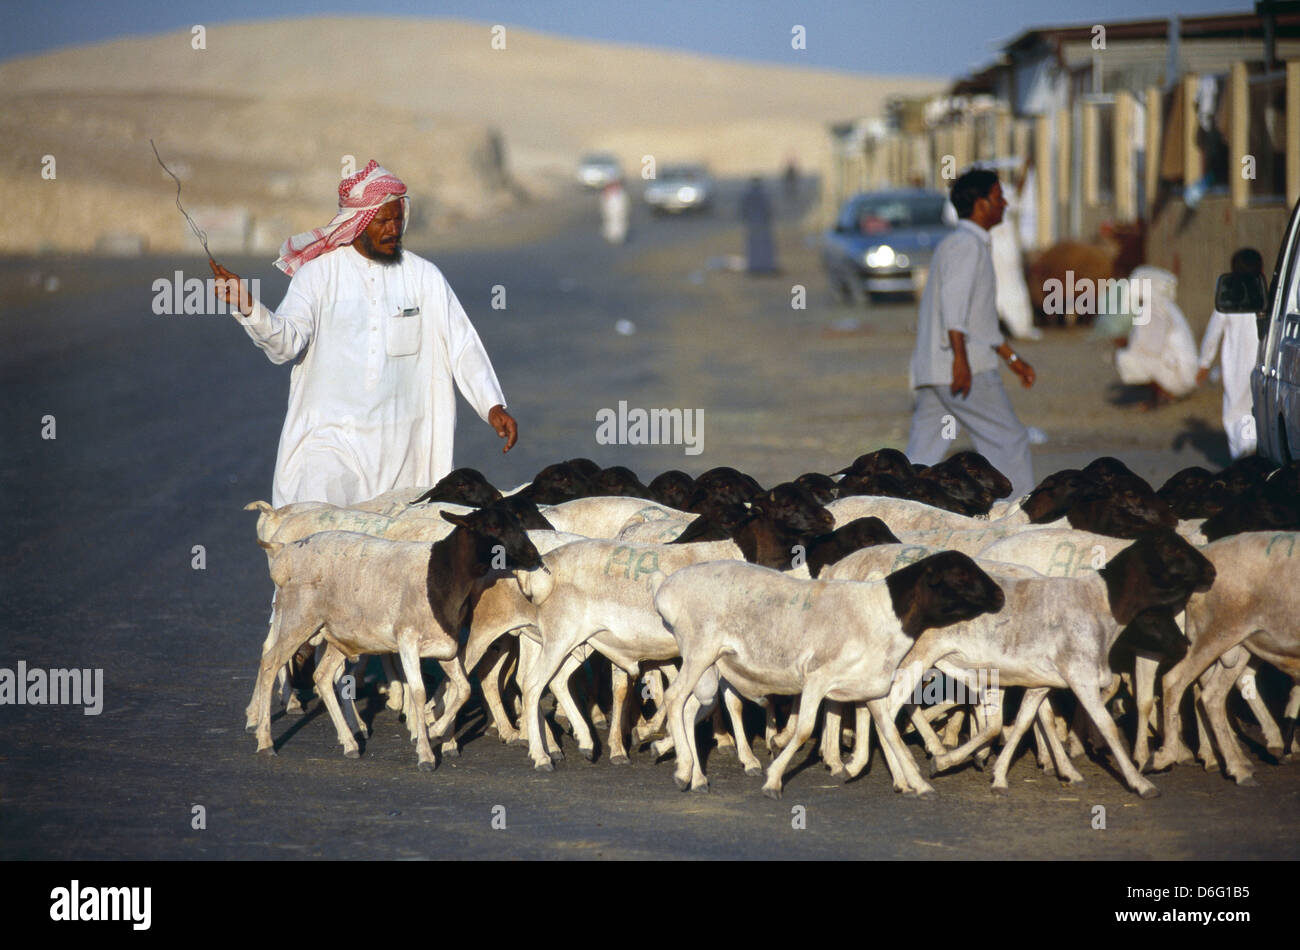 A slaughterhouse on the outskirts of Riyadh. Stock Photo